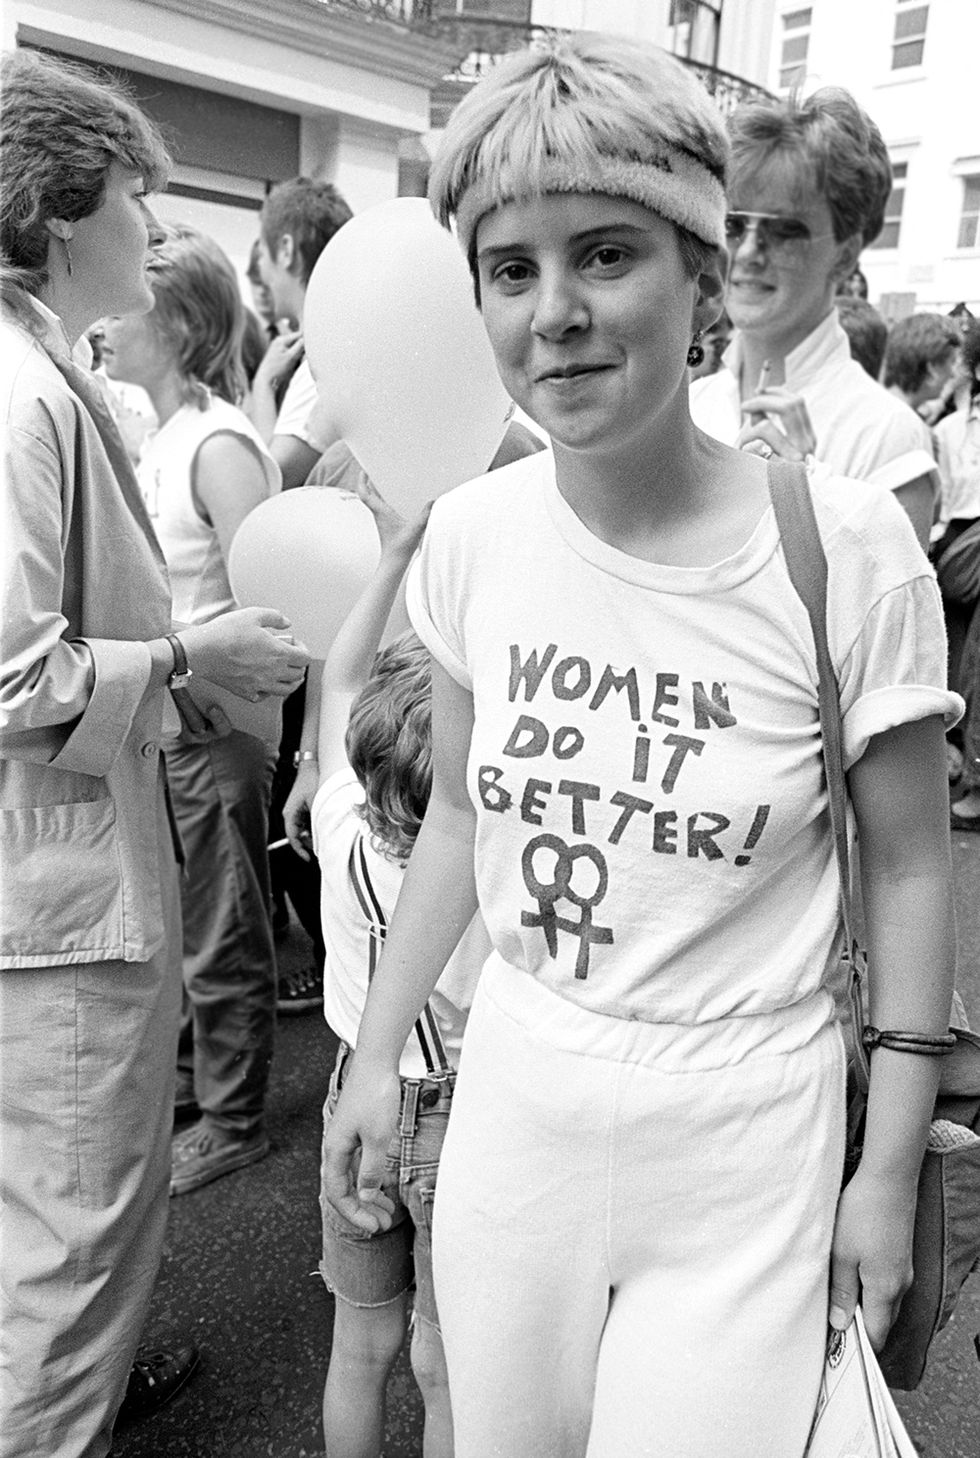 A lesbian at Gay Pride in the 1980s